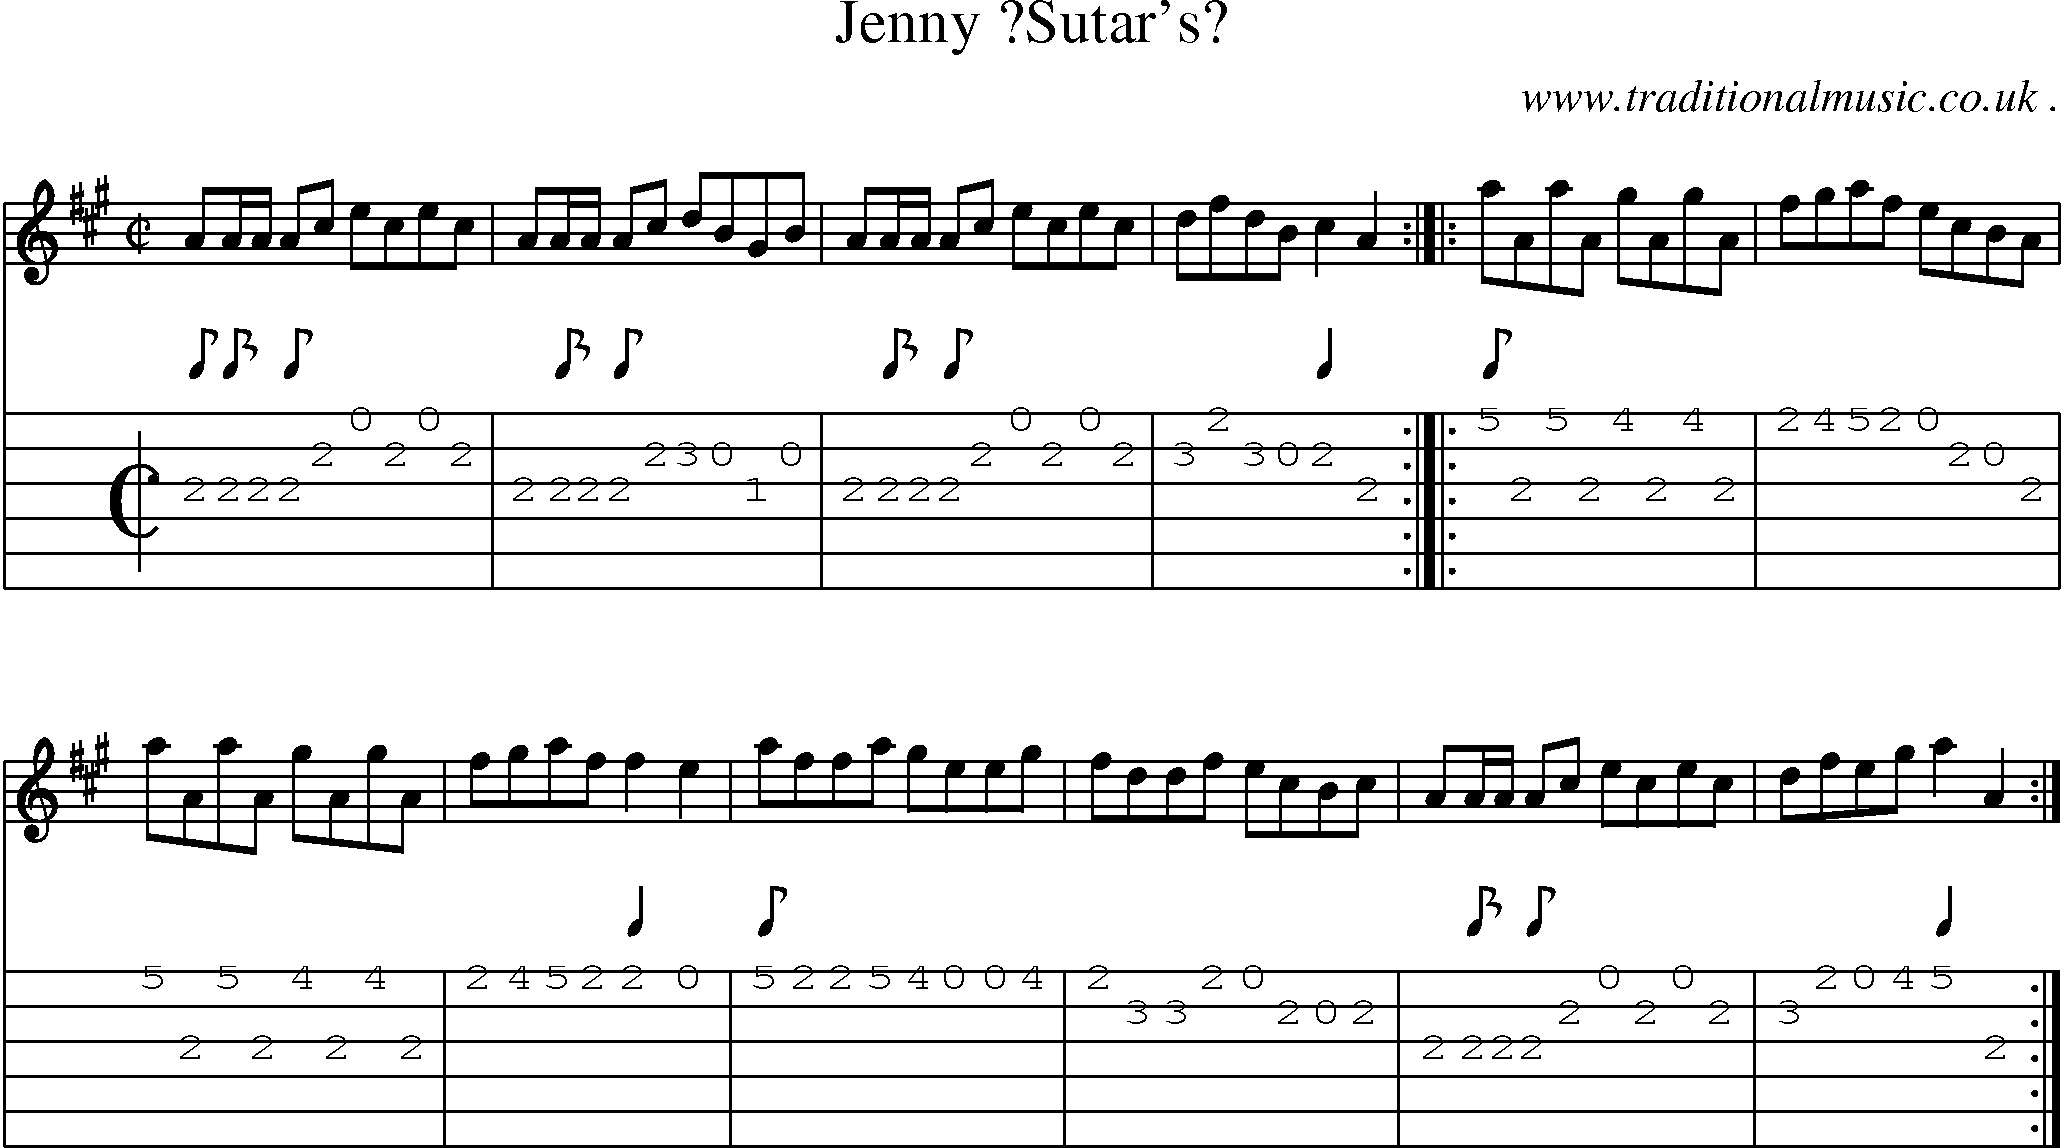 Sheet-Music and Guitar Tabs for Jenny Sutars